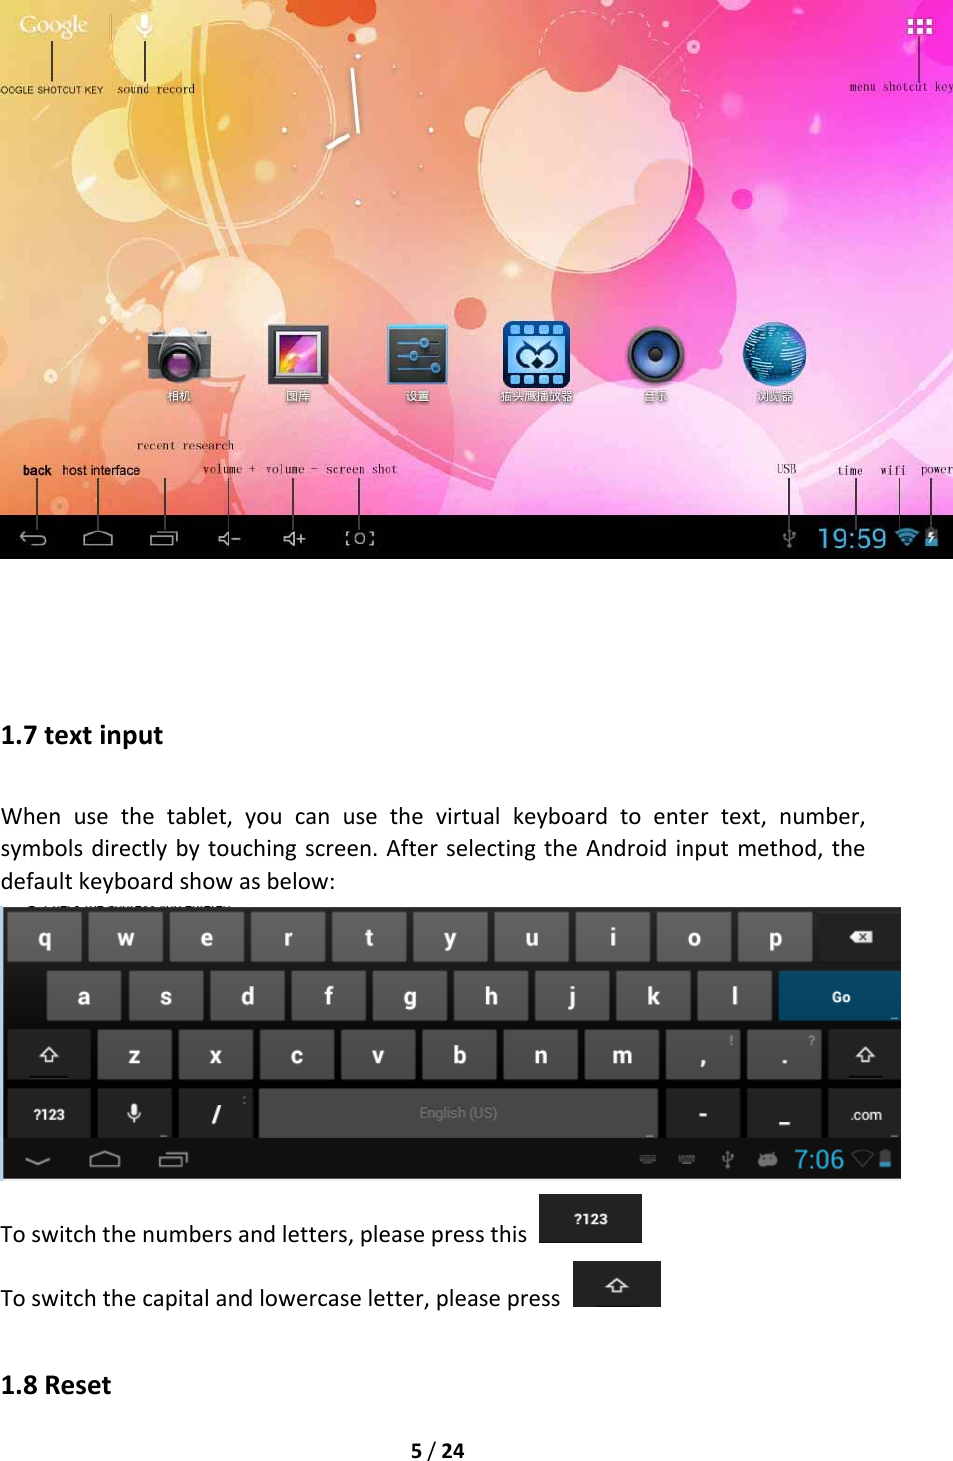 5/241.7textinputWhenusethetablet,youcanusethevirtualkeyboardtoentertext,number,symbolsdirectlybytouchingscreen.AfterselectingtheAndroidinputmethod,thedefaultkeyboardshowasbelow:Toswitchthenumbersandletters,pleasepressthis Toswitchthecapitalandlowercaseletter,pleasepress 1.8Reset